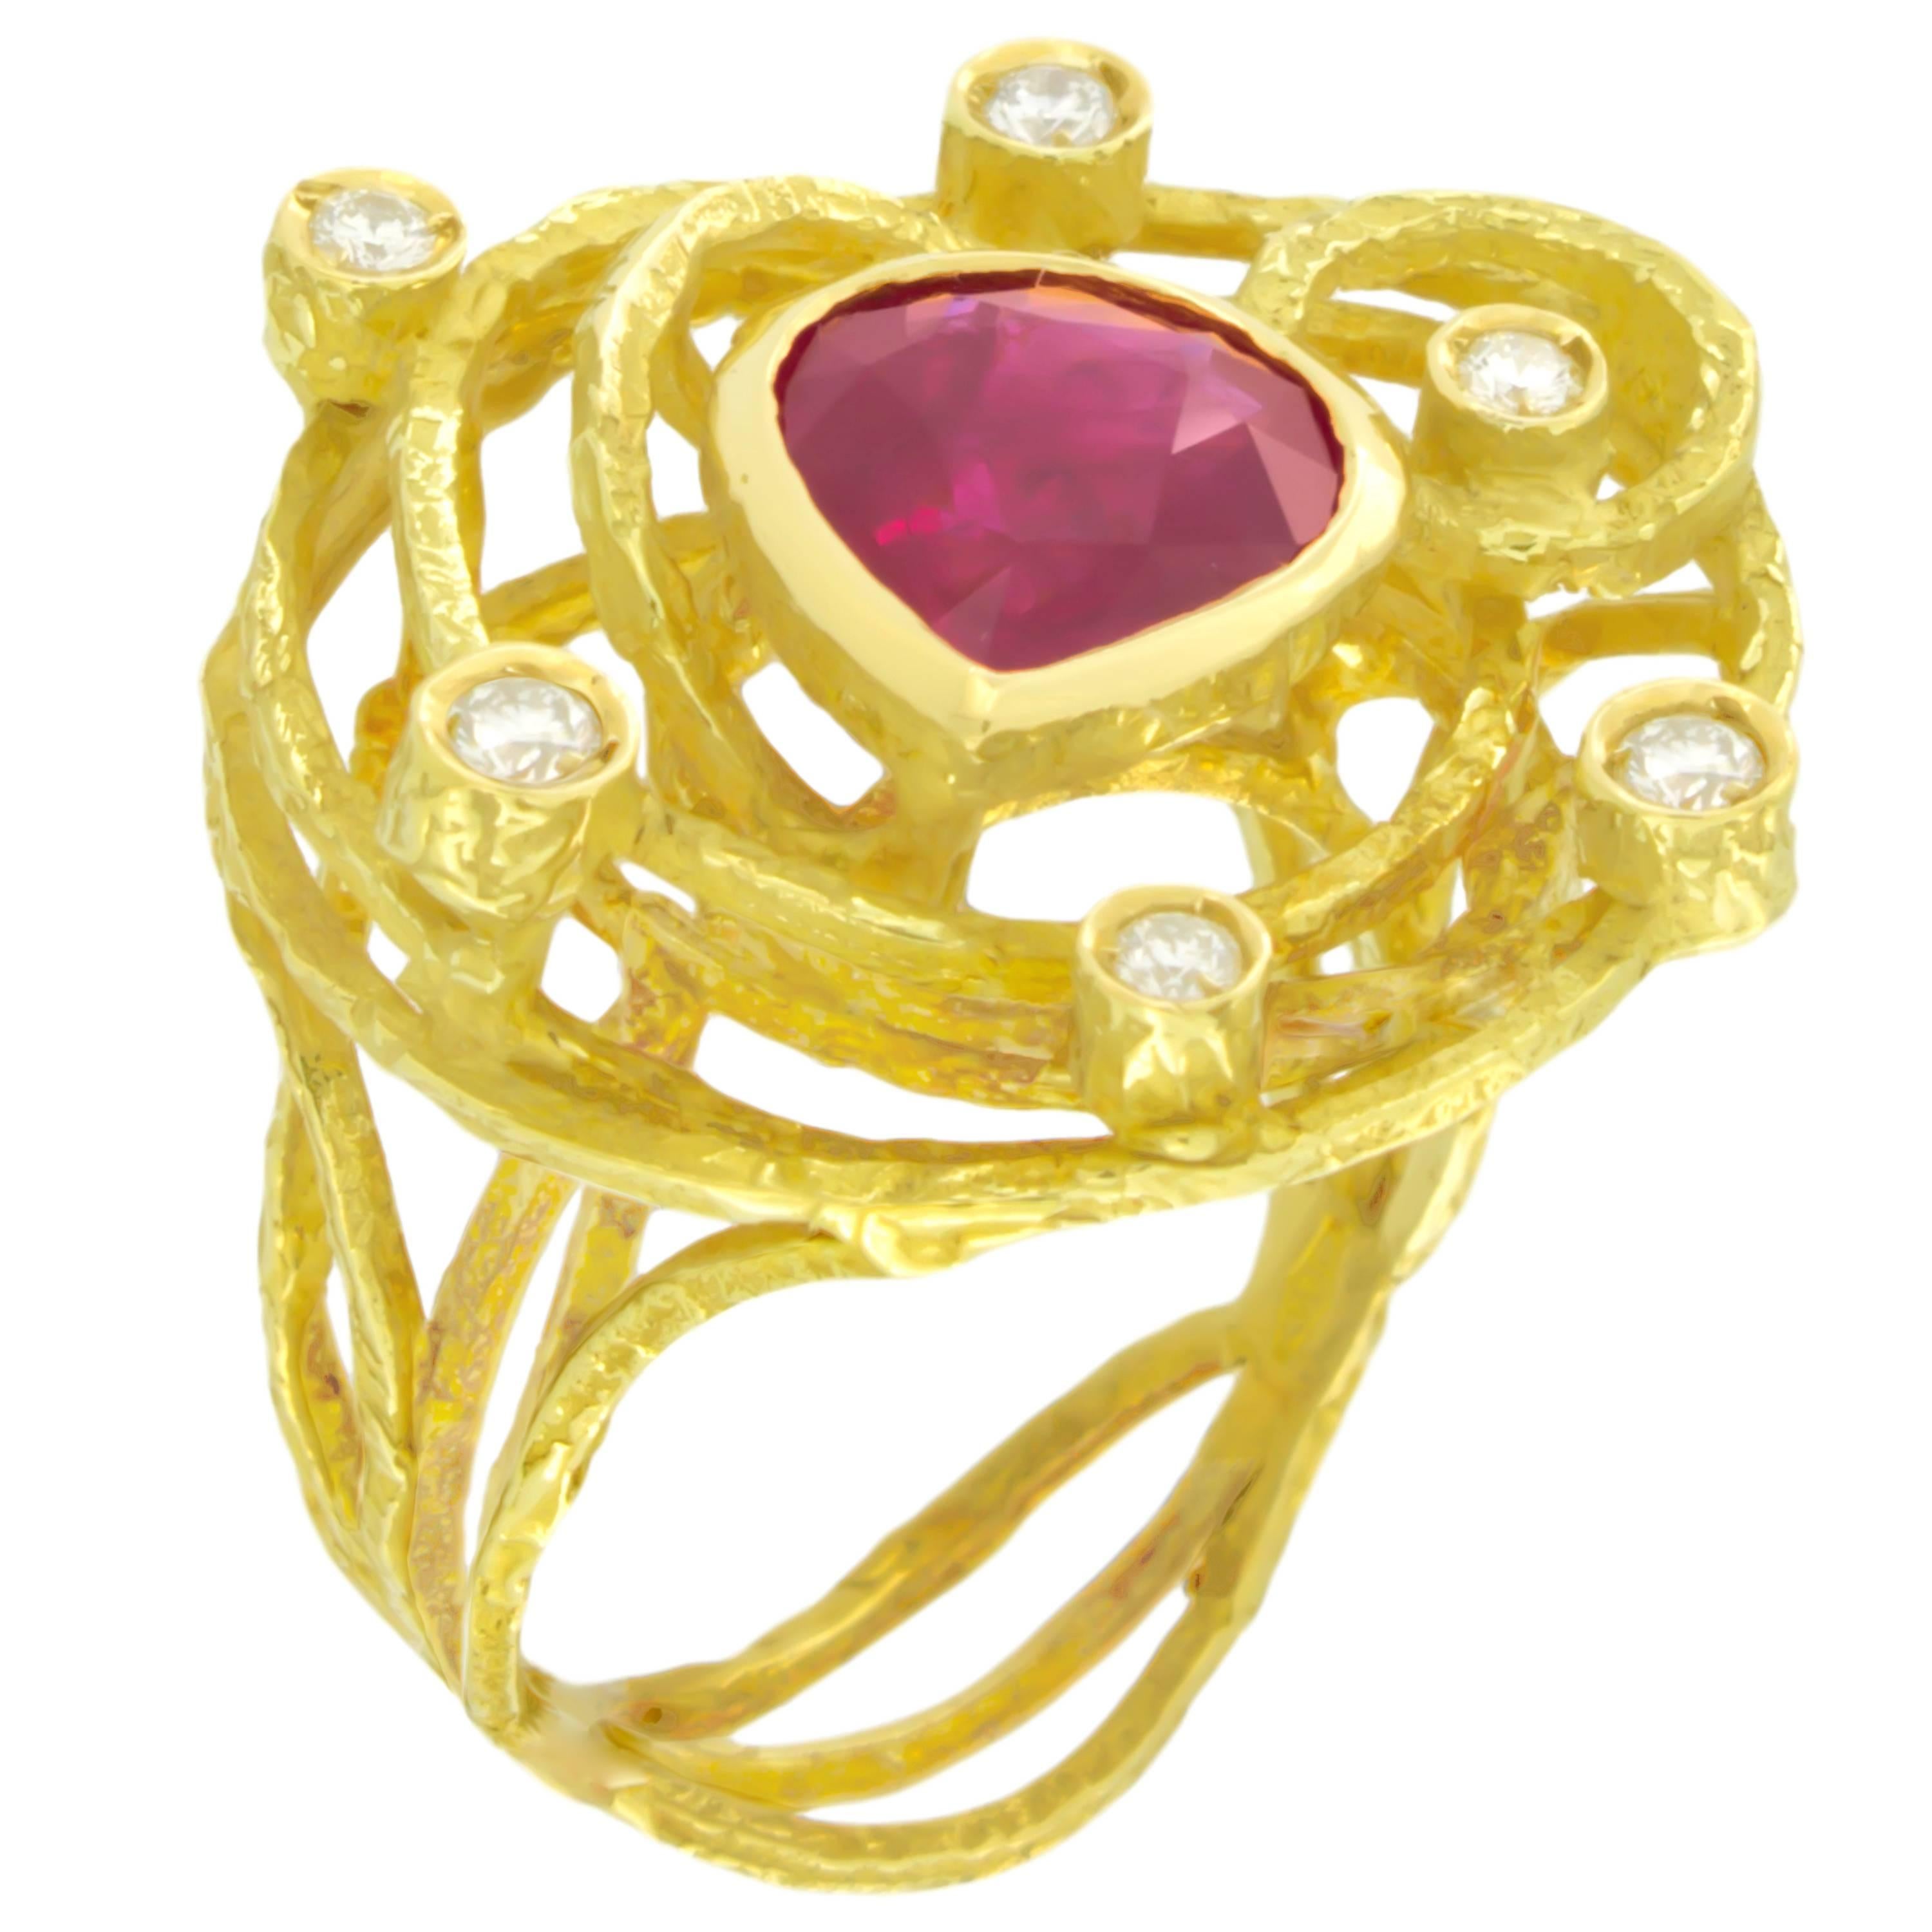 Sacchi 3.39 Carat Pear Ruby and Diamonds Gemstone 18k Yellow Gold Cocktail Ring